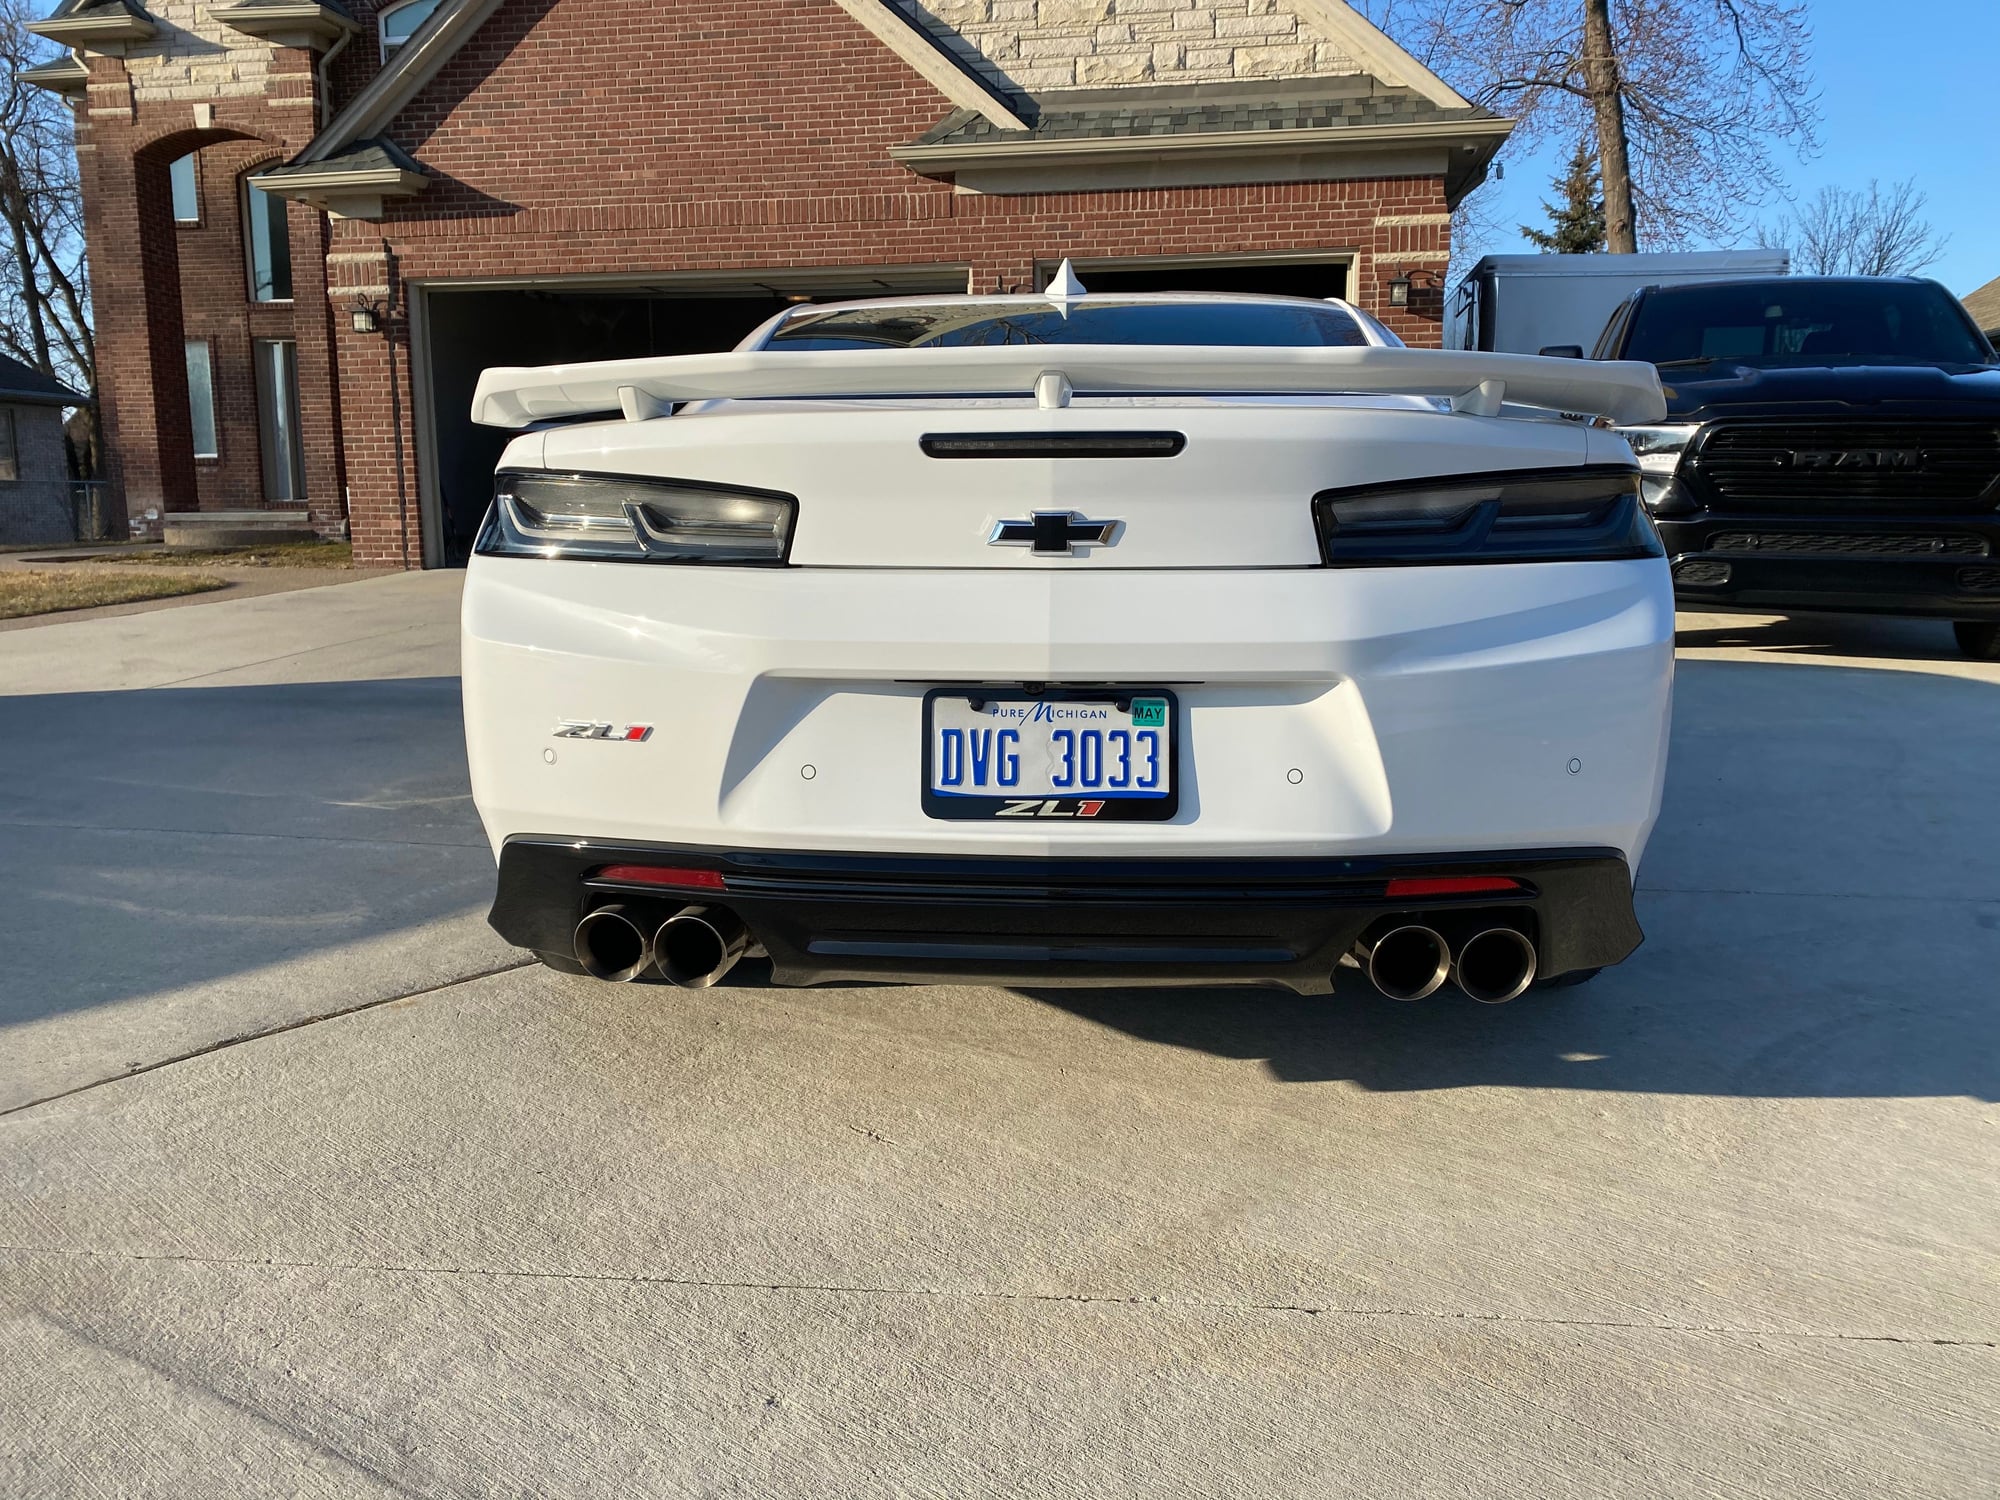 2018 Chevrolet Camaro - 2018 Camaro ZL1 Fully Built Bad A** - Used - VIN 1g1fk1r62j0143091 - 6,041 Miles - 8 cyl - 2WD - Automatic - Coupe - White - Sterling Heights, MI 48313, United States